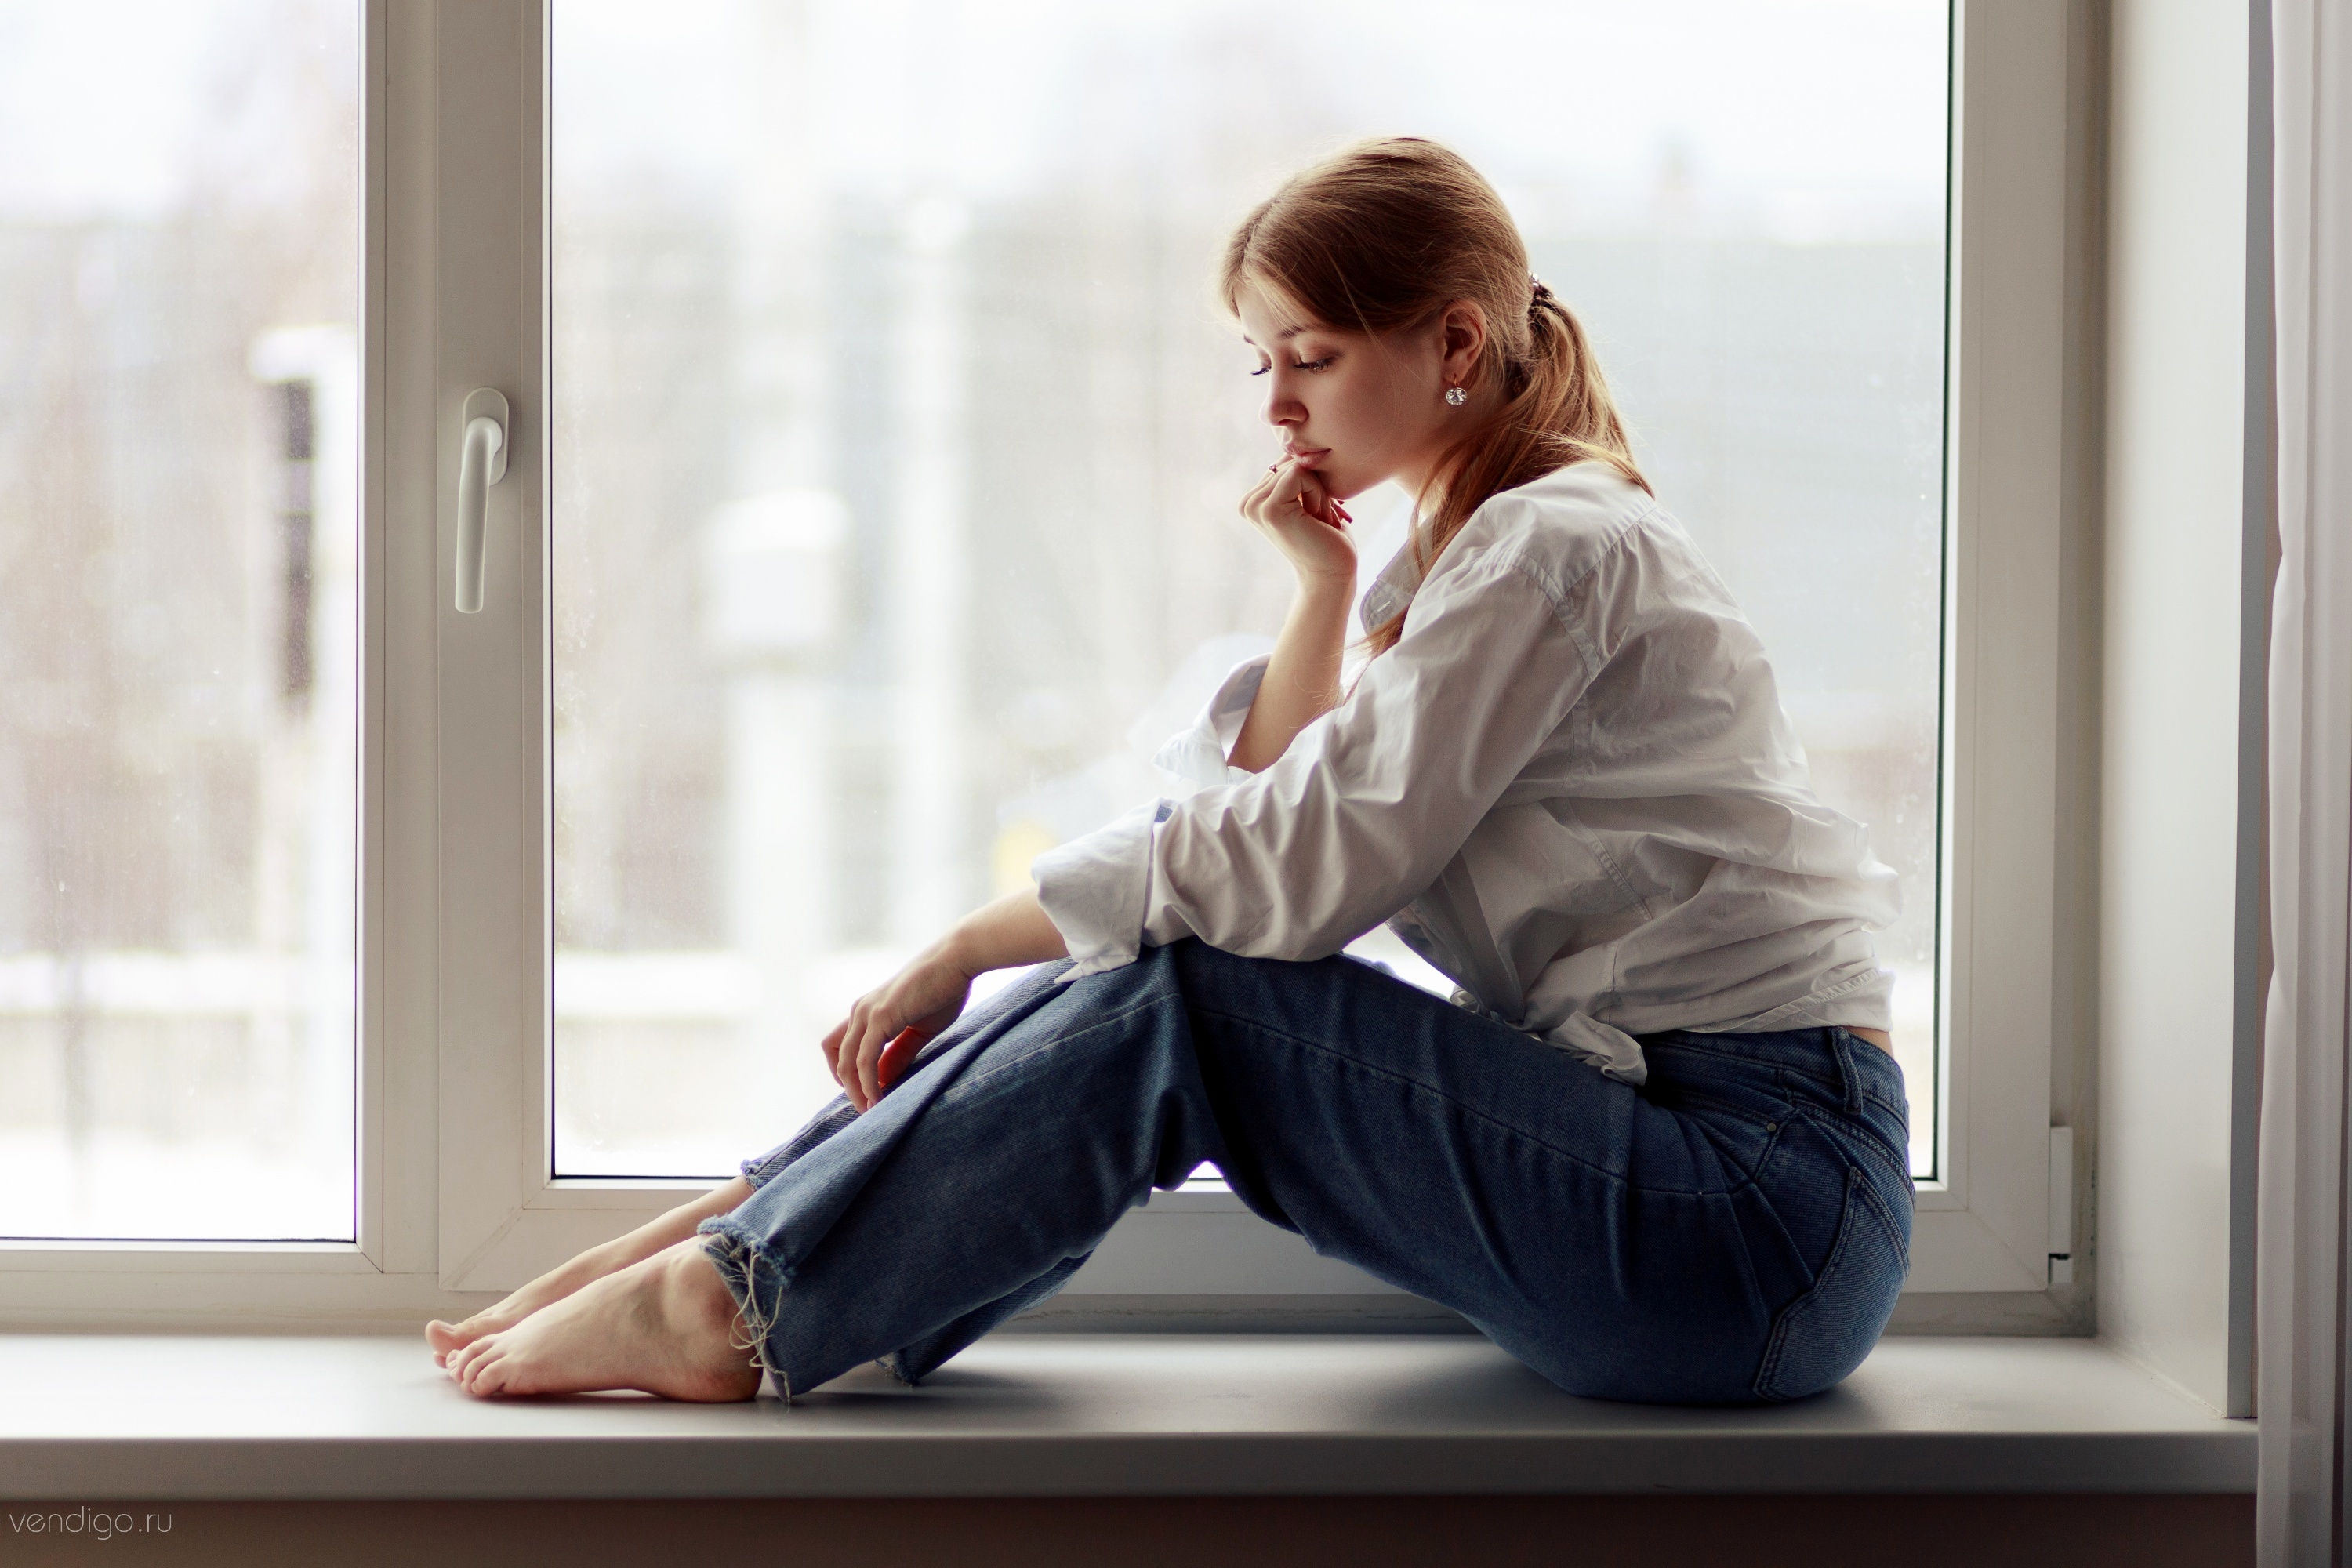 People 3000x2000 model red lipstick white shirt jeans barefoot sitting by the window hand on face women